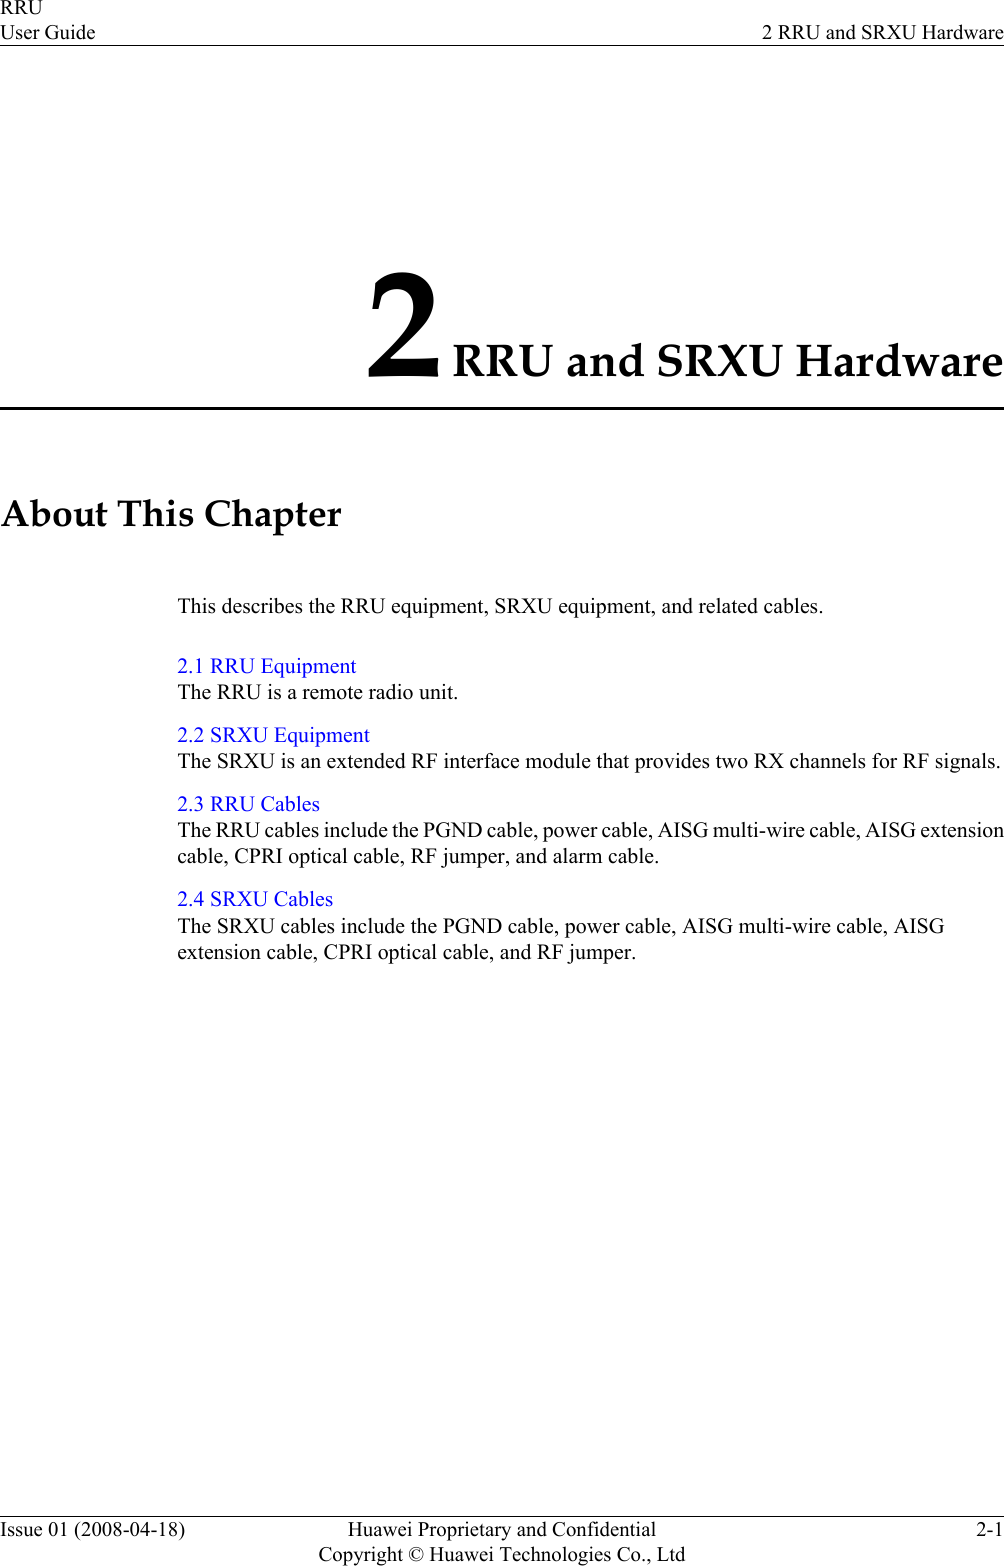 2 RRU and SRXU HardwareAbout This ChapterThis describes the RRU equipment, SRXU equipment, and related cables.2.1 RRU EquipmentThe RRU is a remote radio unit.2.2 SRXU EquipmentThe SRXU is an extended RF interface module that provides two RX channels for RF signals.2.3 RRU CablesThe RRU cables include the PGND cable, power cable, AISG multi-wire cable, AISG extensioncable, CPRI optical cable, RF jumper, and alarm cable.2.4 SRXU CablesThe SRXU cables include the PGND cable, power cable, AISG multi-wire cable, AISGextension cable, CPRI optical cable, and RF jumper.RRUUser Guide 2 RRU and SRXU HardwareIssue 01 (2008-04-18) Huawei Proprietary and ConfidentialCopyright © Huawei Technologies Co., Ltd2-1